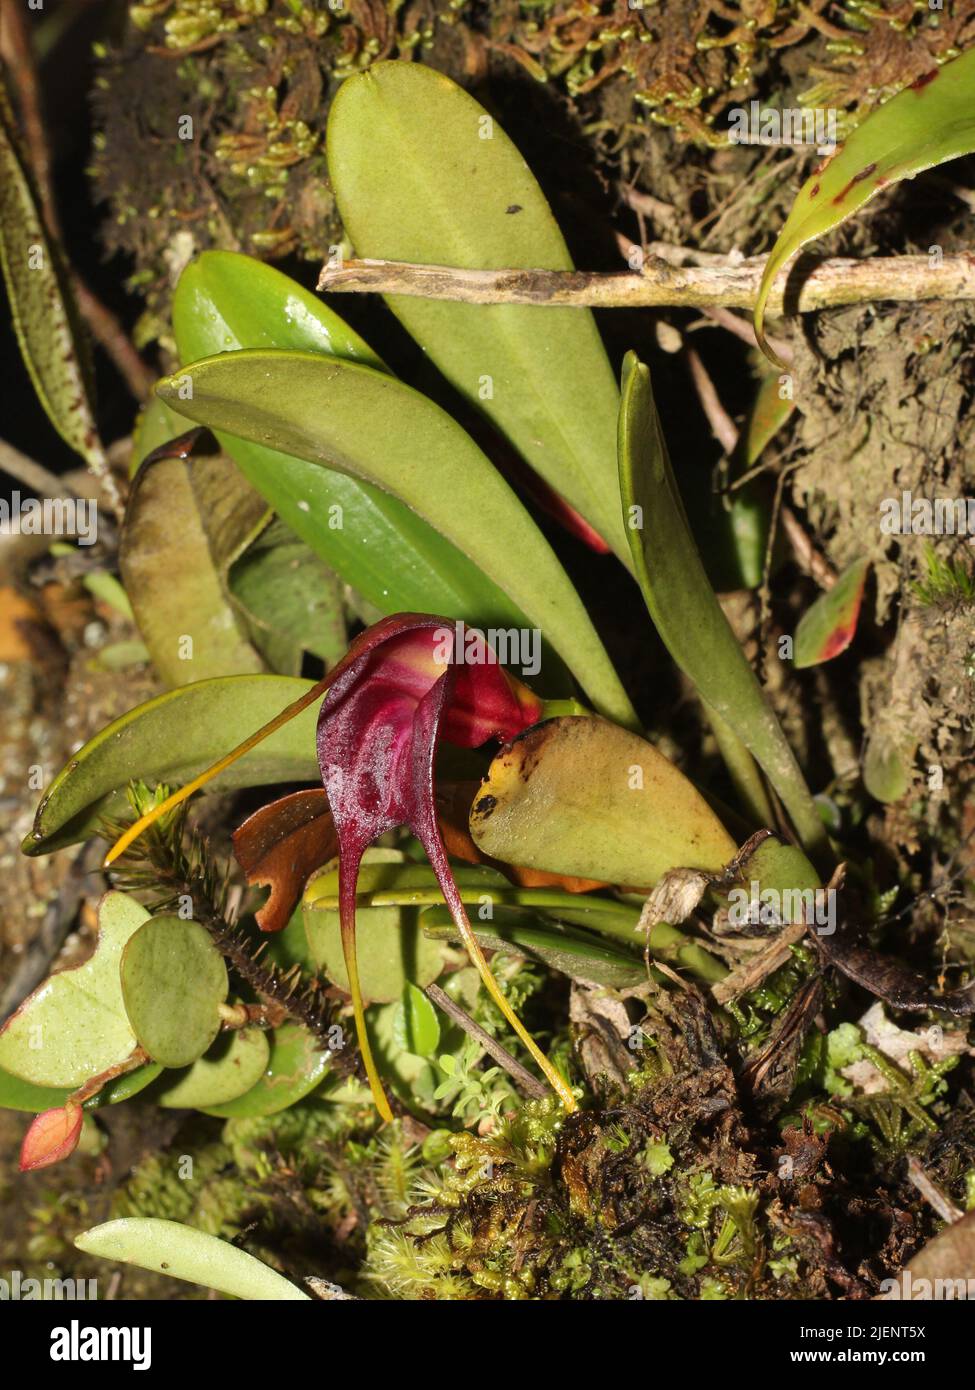 Tropical orchid Masdevallia rolfeana from cloud forests of Costa Rica Stock Photo